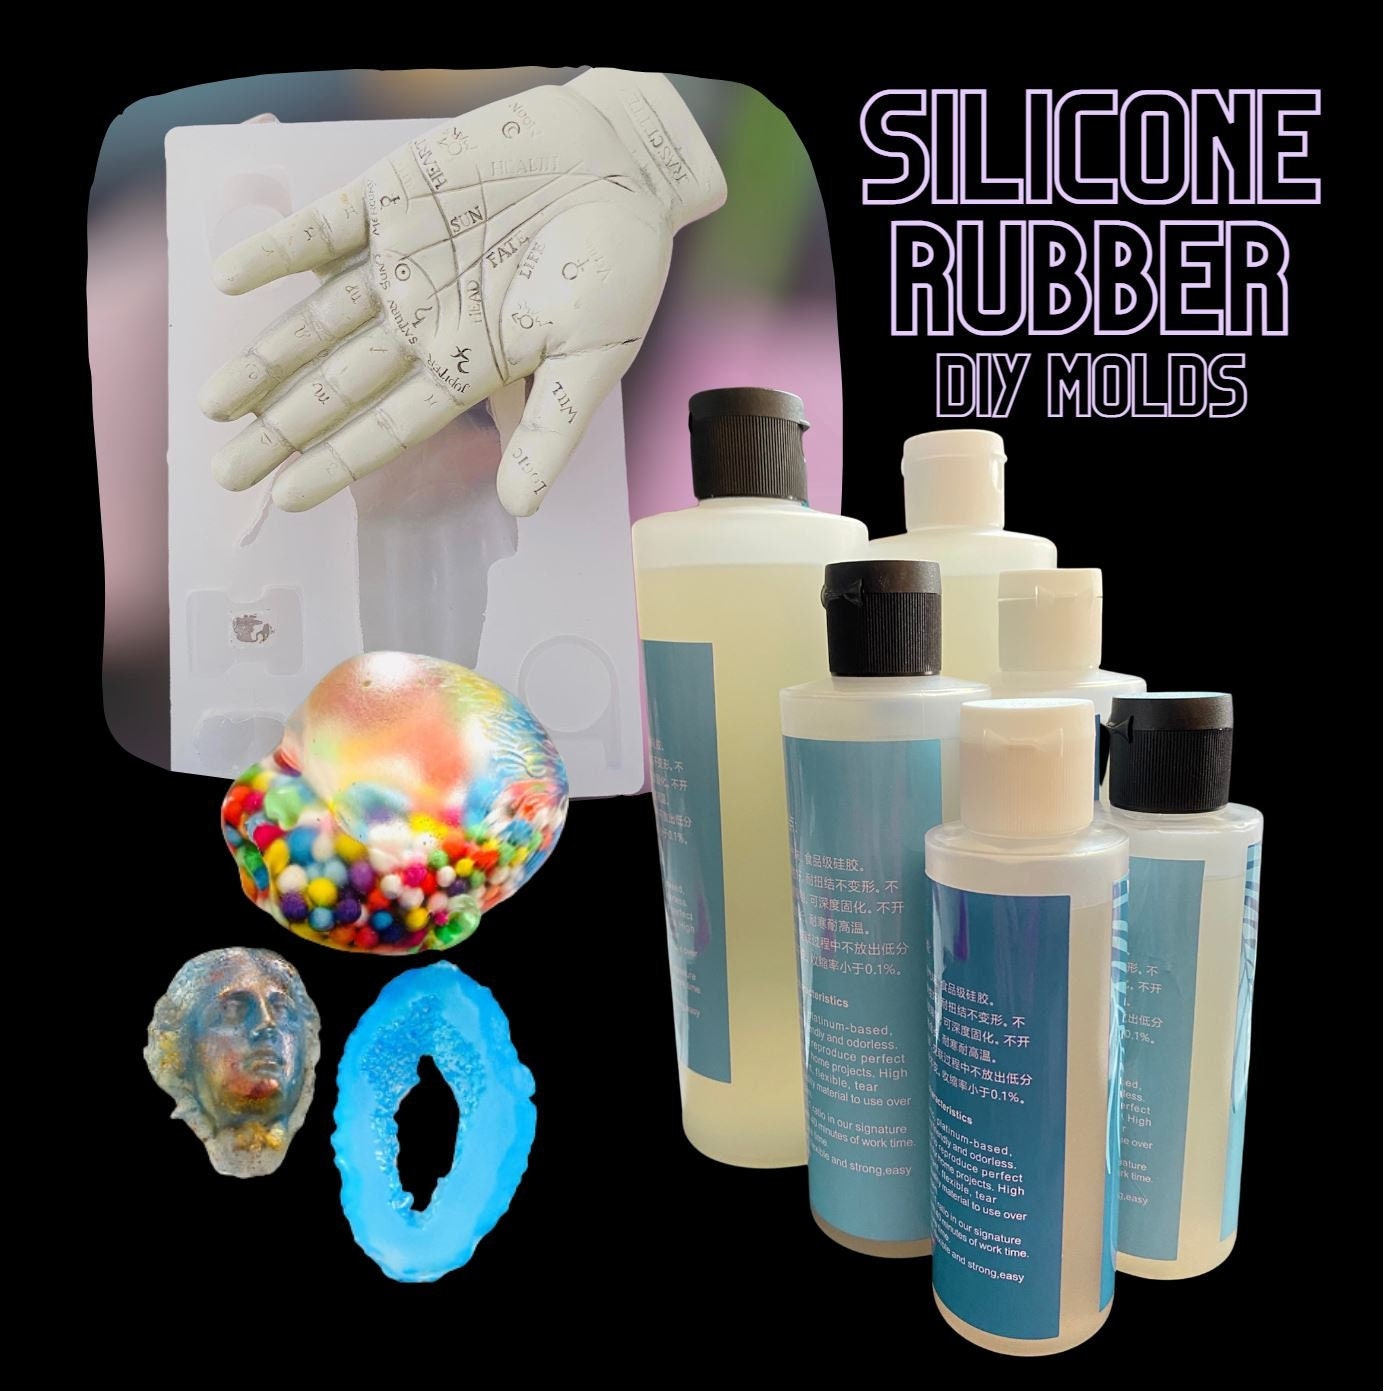 Silicone Mold Making Kit Liquid Silicone Rubber Non-Toxic Translucent Clear  Mold Making Silicone-Mixing Ratio 1:1-Molding Silicone for Resin Molds,Silicone  Molds DIY Manual Making (N.W 20.2oz) 